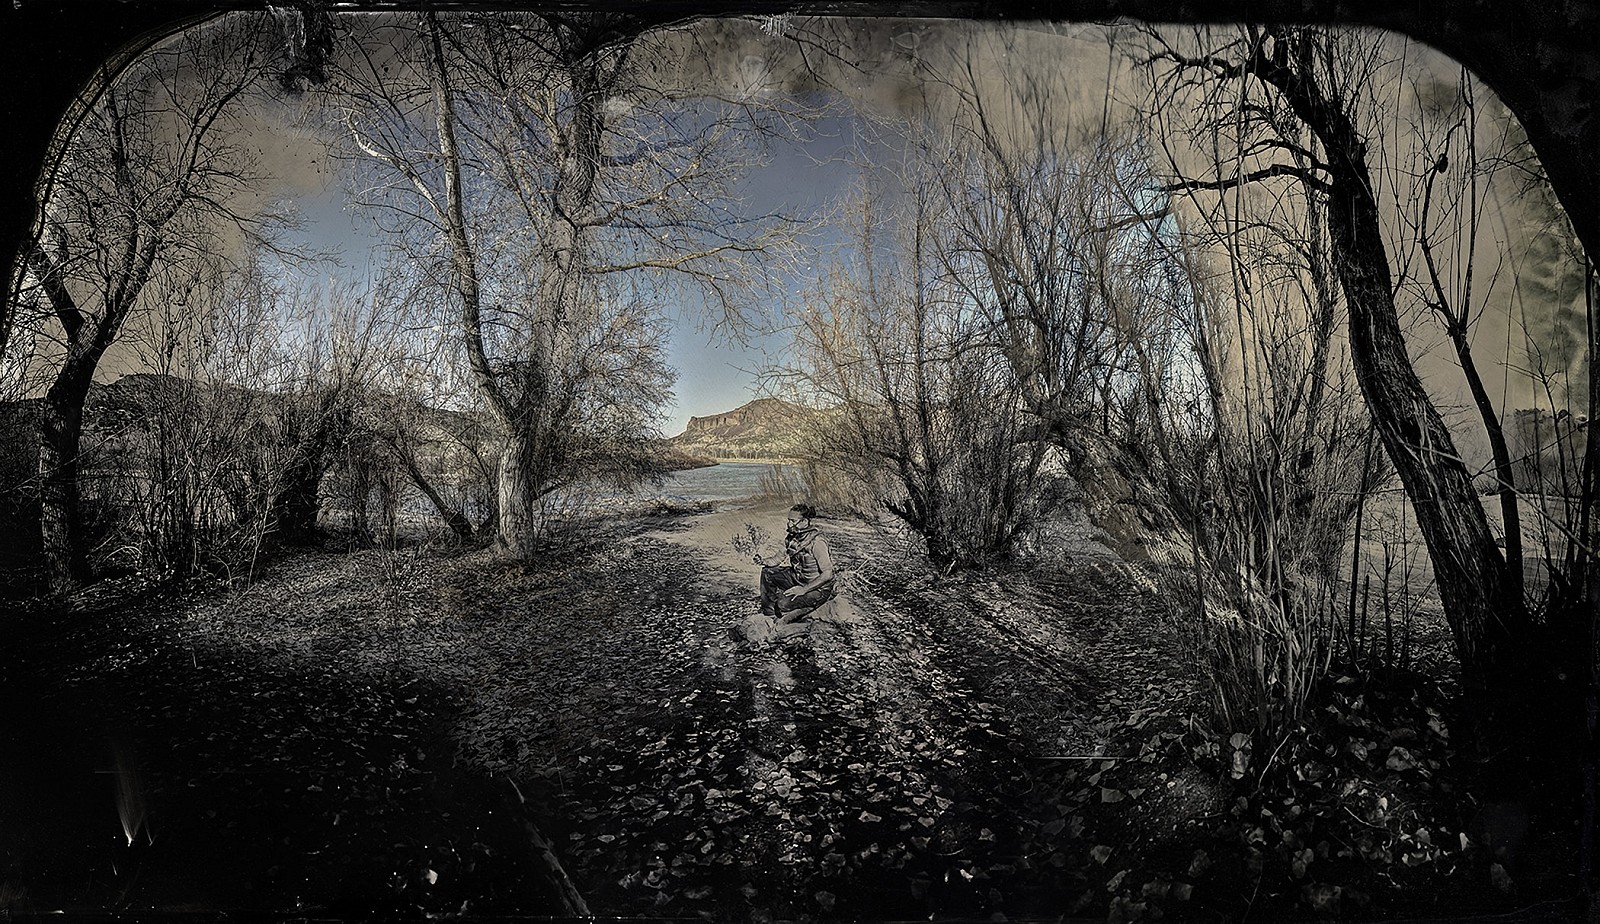 Will Wilson
Auto Immune Response: On the Consideration of Invasive Species, Downriver From Los Alamos, NM, 2013
Archival Duratrans Print in LED lightbox, from the original wet plate/digitl hybrid capture, 44 x 77 in.